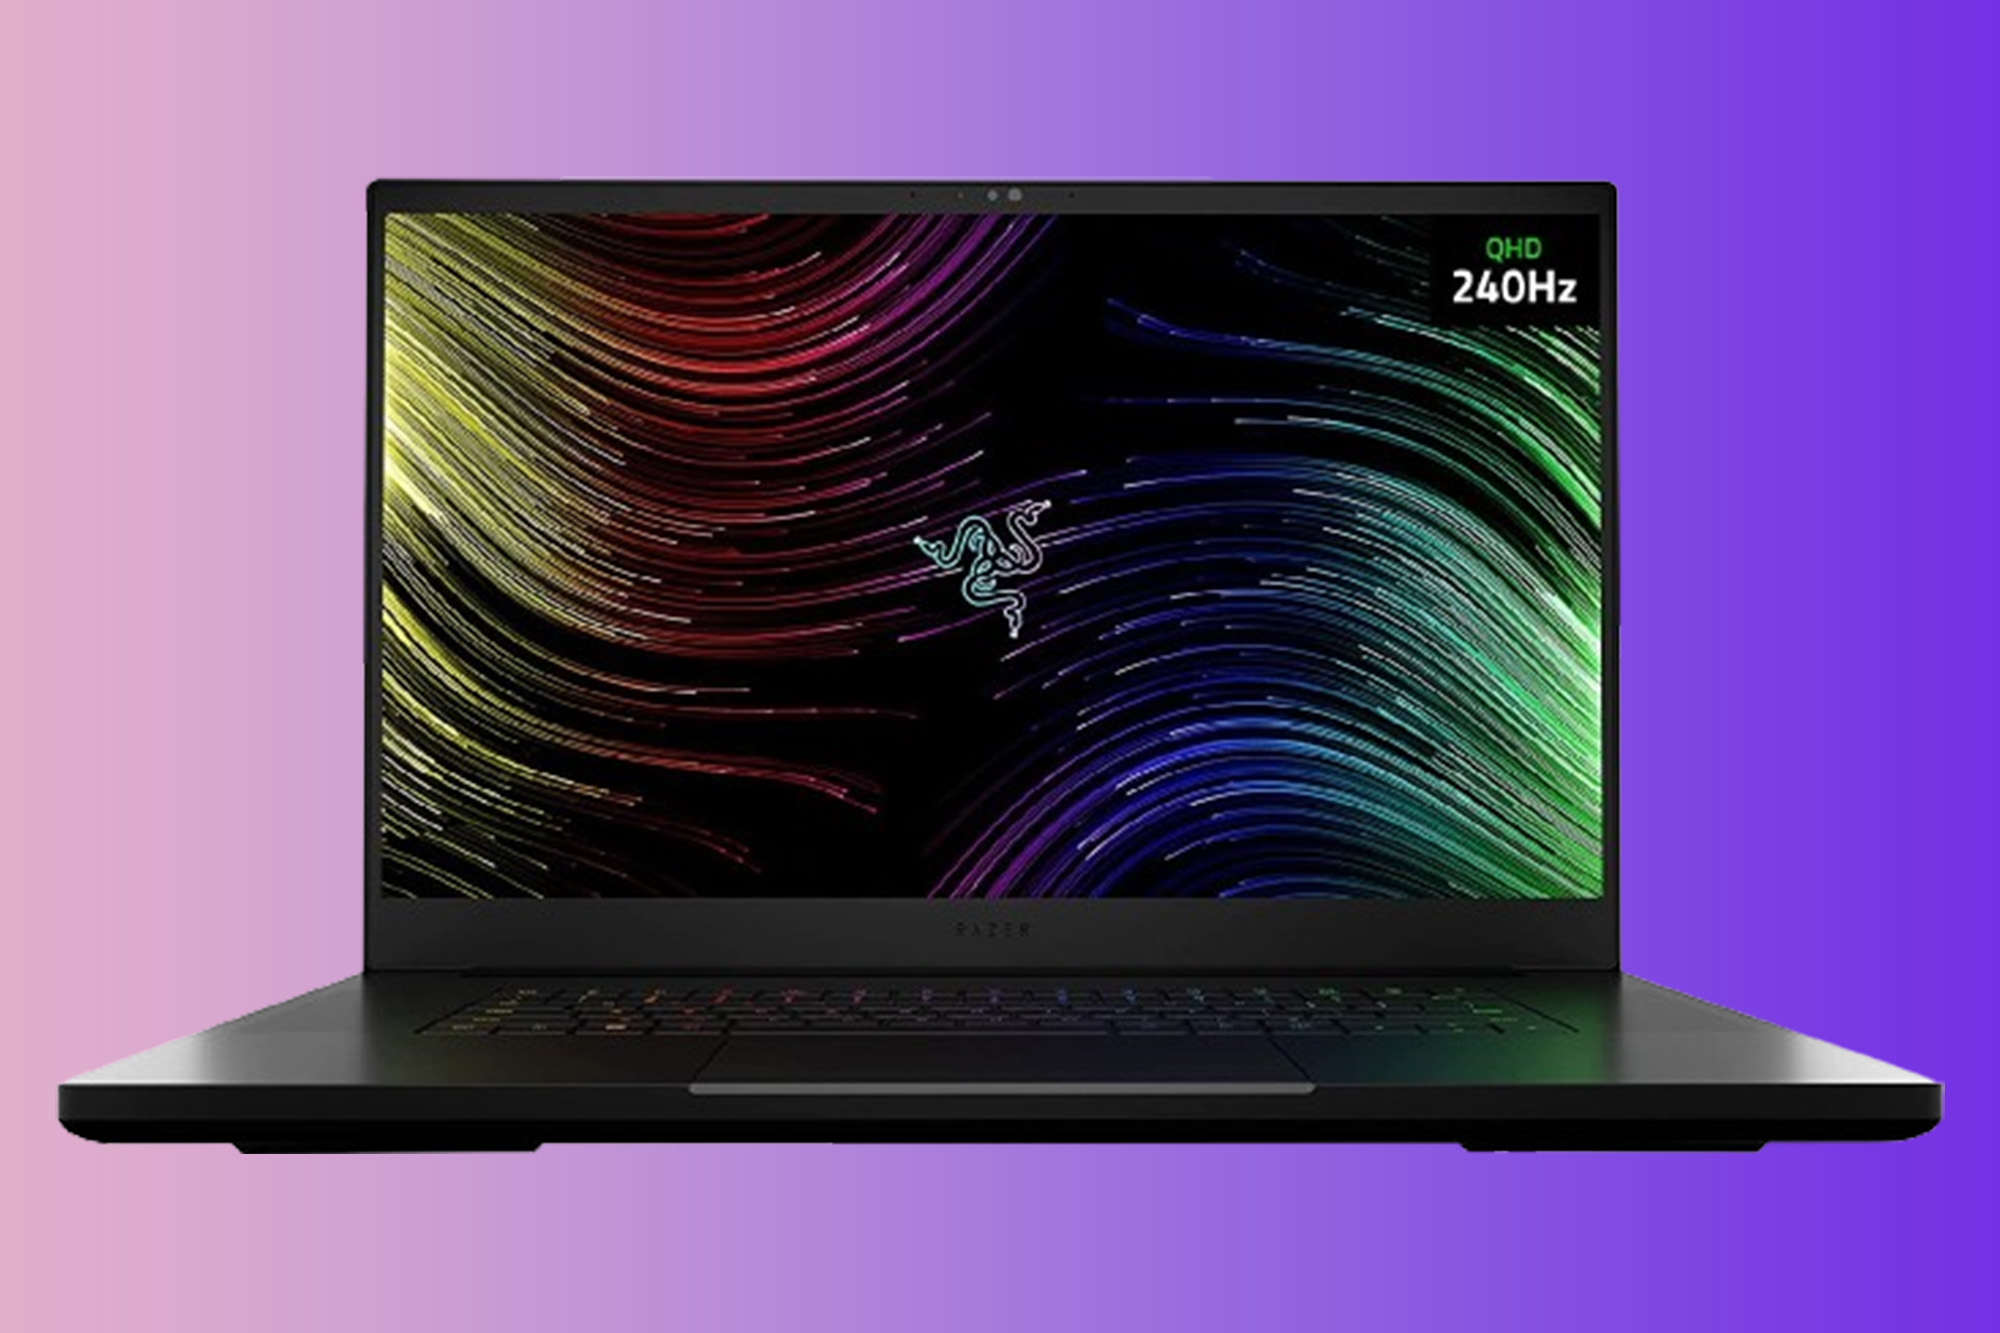 Get a Razer gaming laptop for $700 off on Amazon